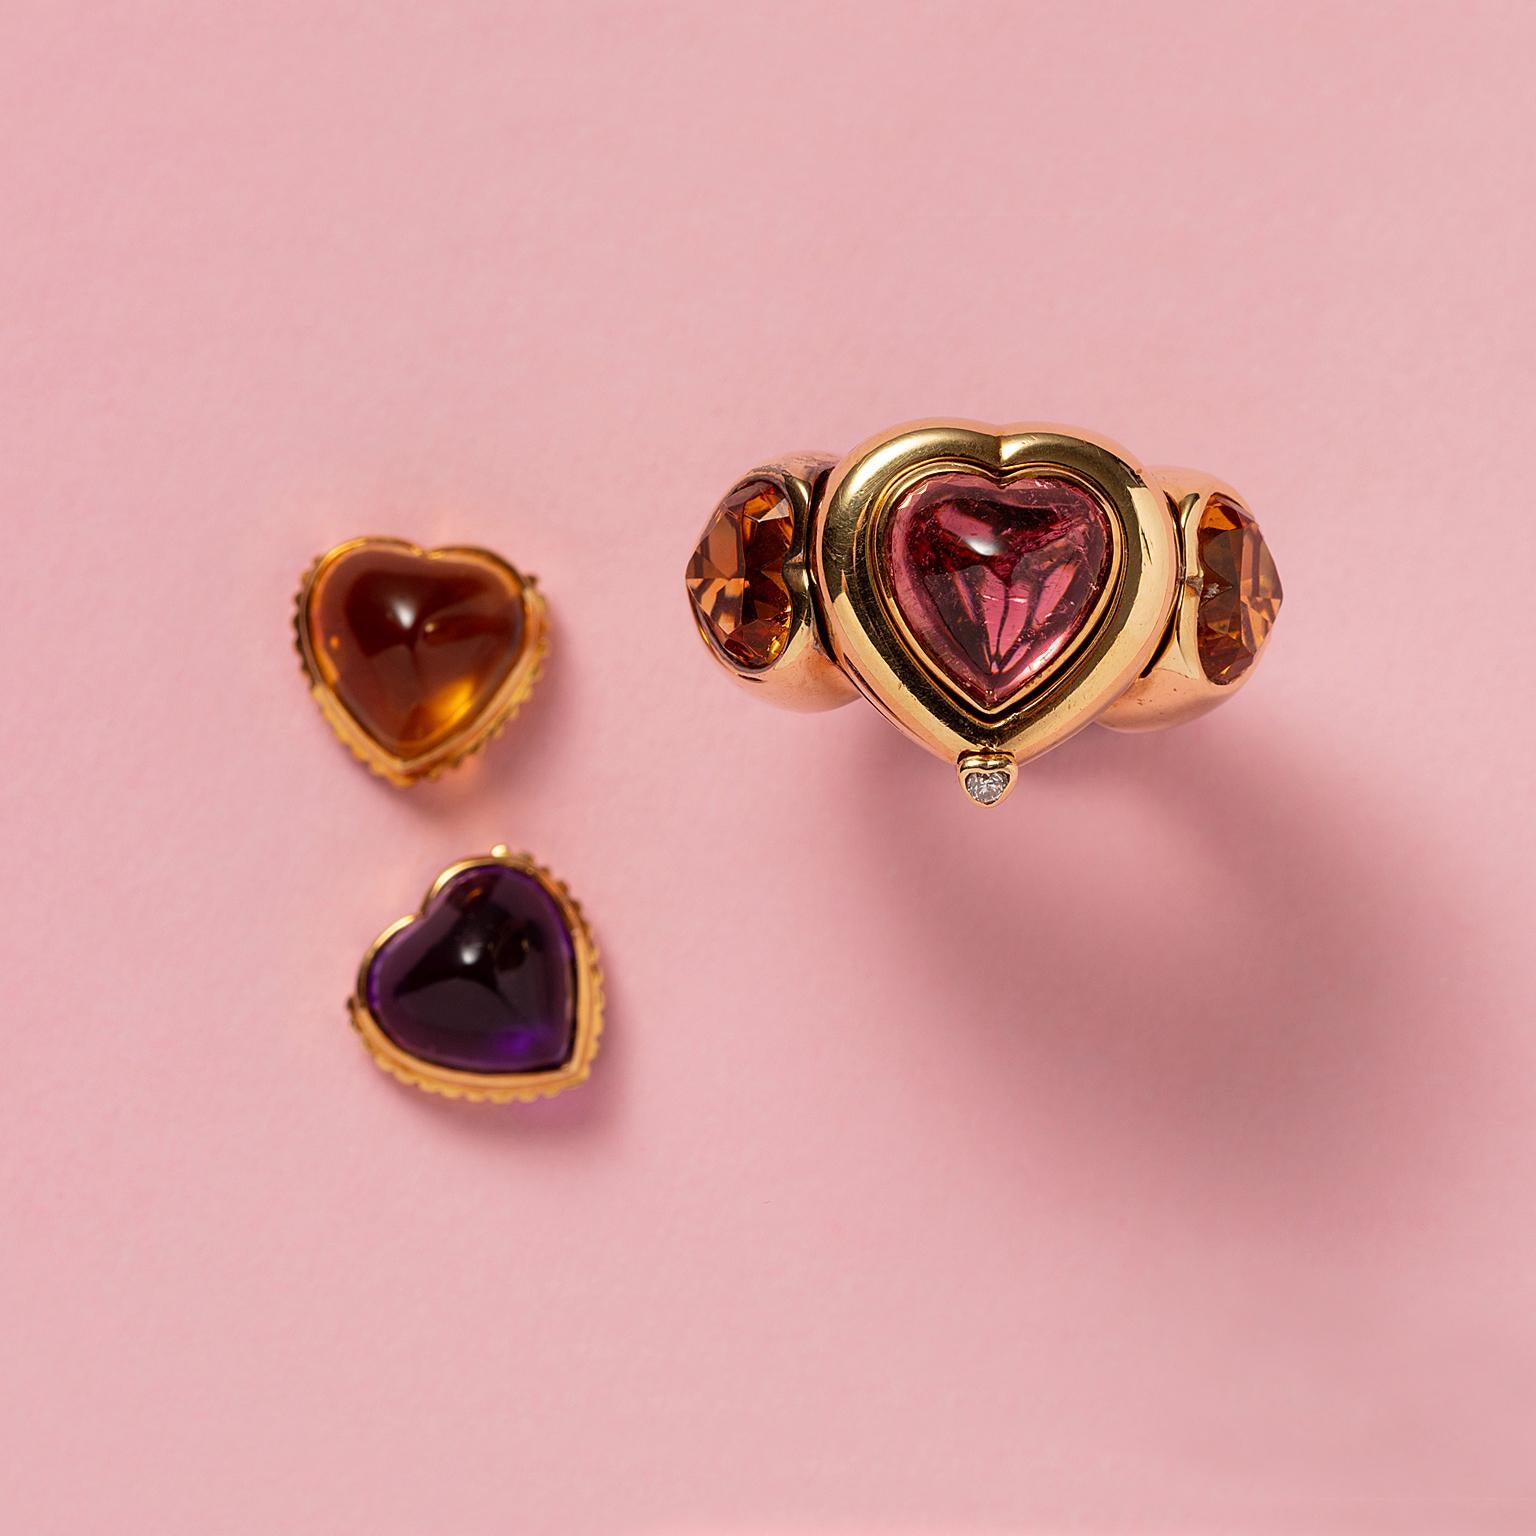 An 18 carat yellow gold heart ring with an interchangeable heart-shaped cabochon cut amethyst, pink tourmaline and citrine, a heart-shaped faceted citrines on each side, two small heart-shaped citrines at the bottom of the shank. The ring opens with